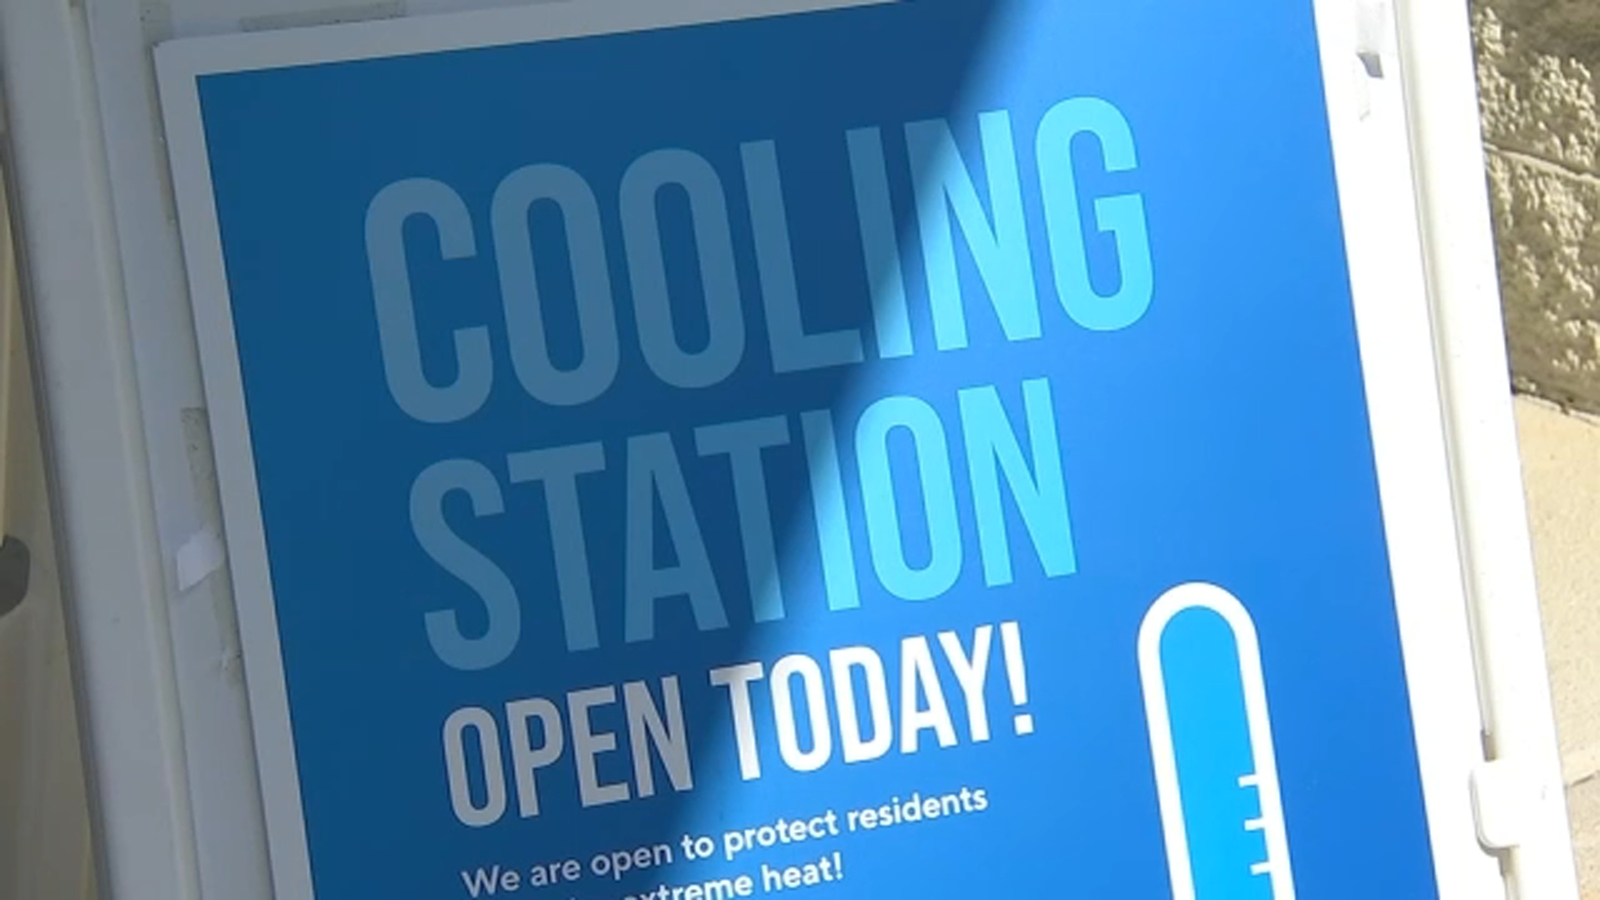 Heatwave NC | As summer temperatures hit, tie or break records, Cooling stations open in Raleigh, Durham, Fayetteville, Carrboro [Video]